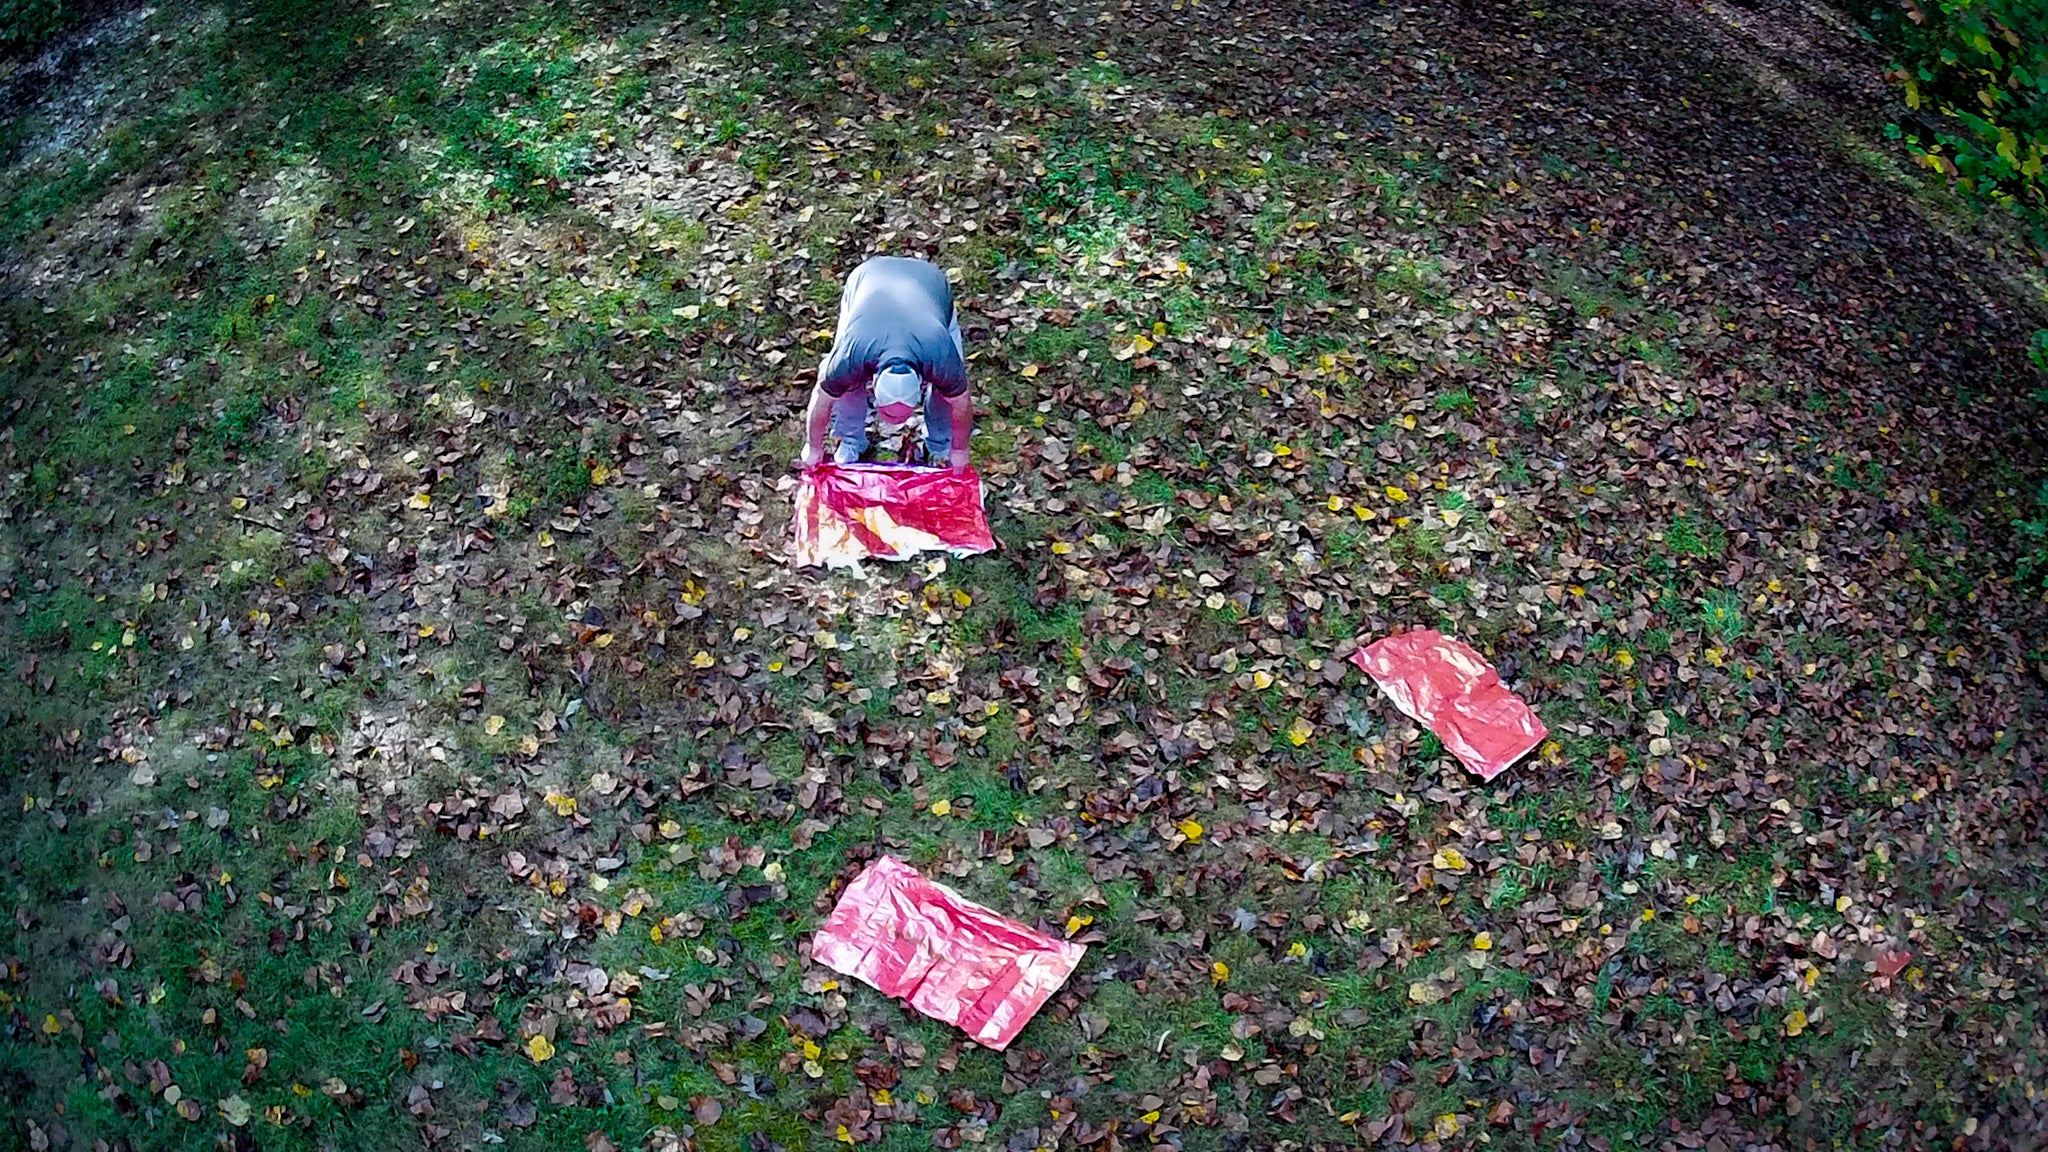 A man lays red emergency blankets on the ground to attract the attention of search teams from above.